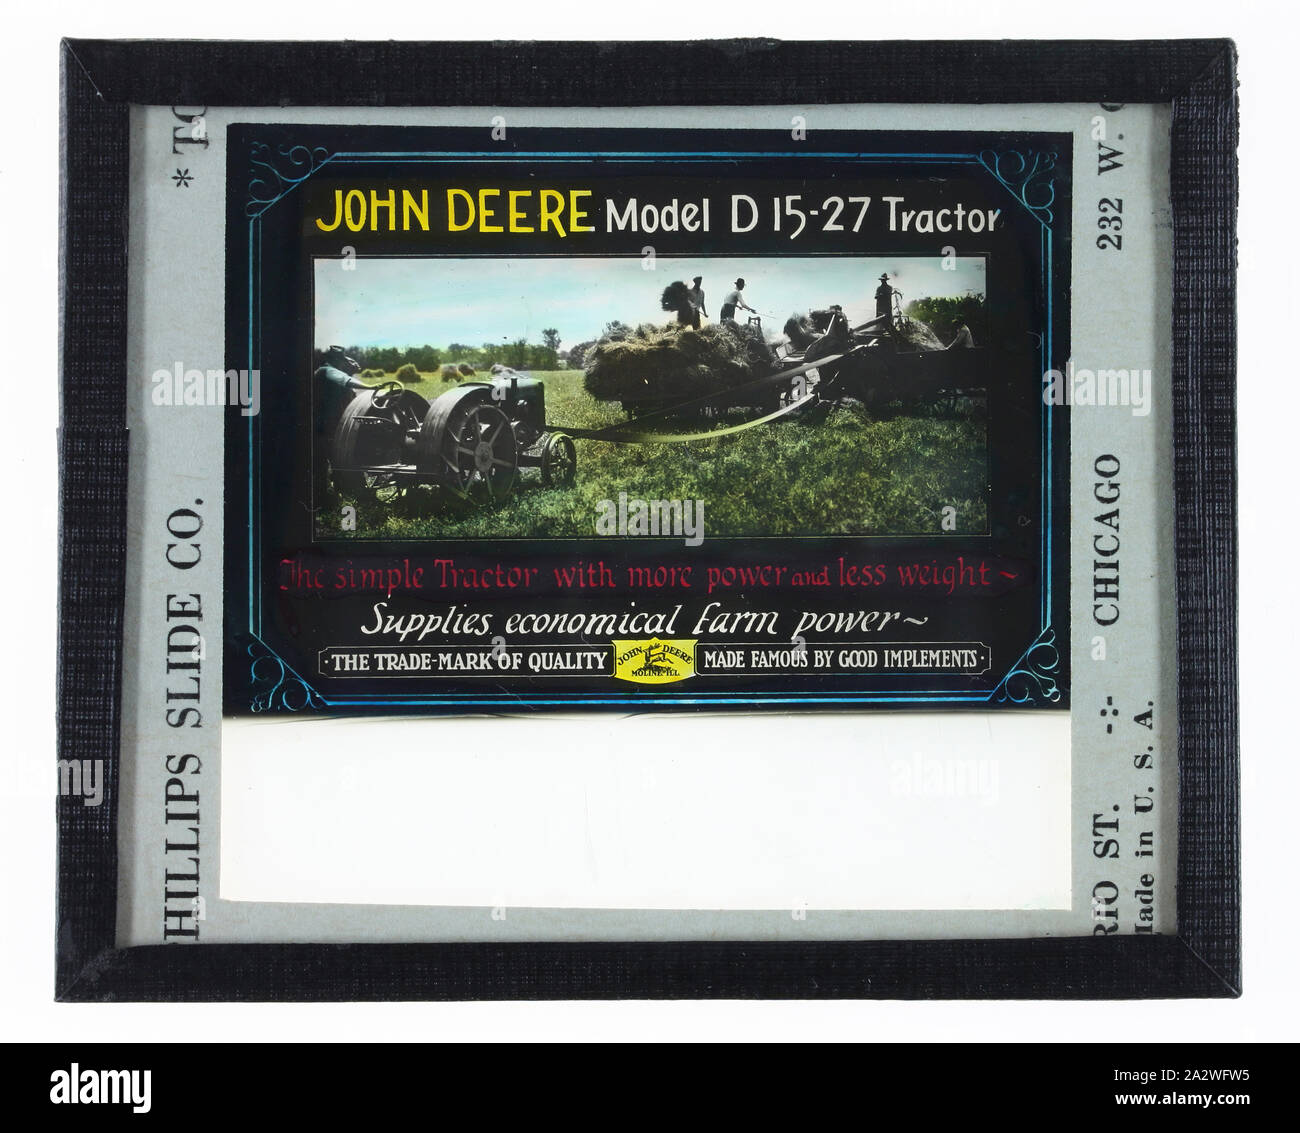 Glass Advertising Slide - John Deere Tractor, United State of America, circa 1930, Colour glass slide advertisement featuring a John Deere Model D15-27 tractor. .It was made by Phillips Slide Co., Chicago, USA, circa 1930 for cinema use Stock Photo